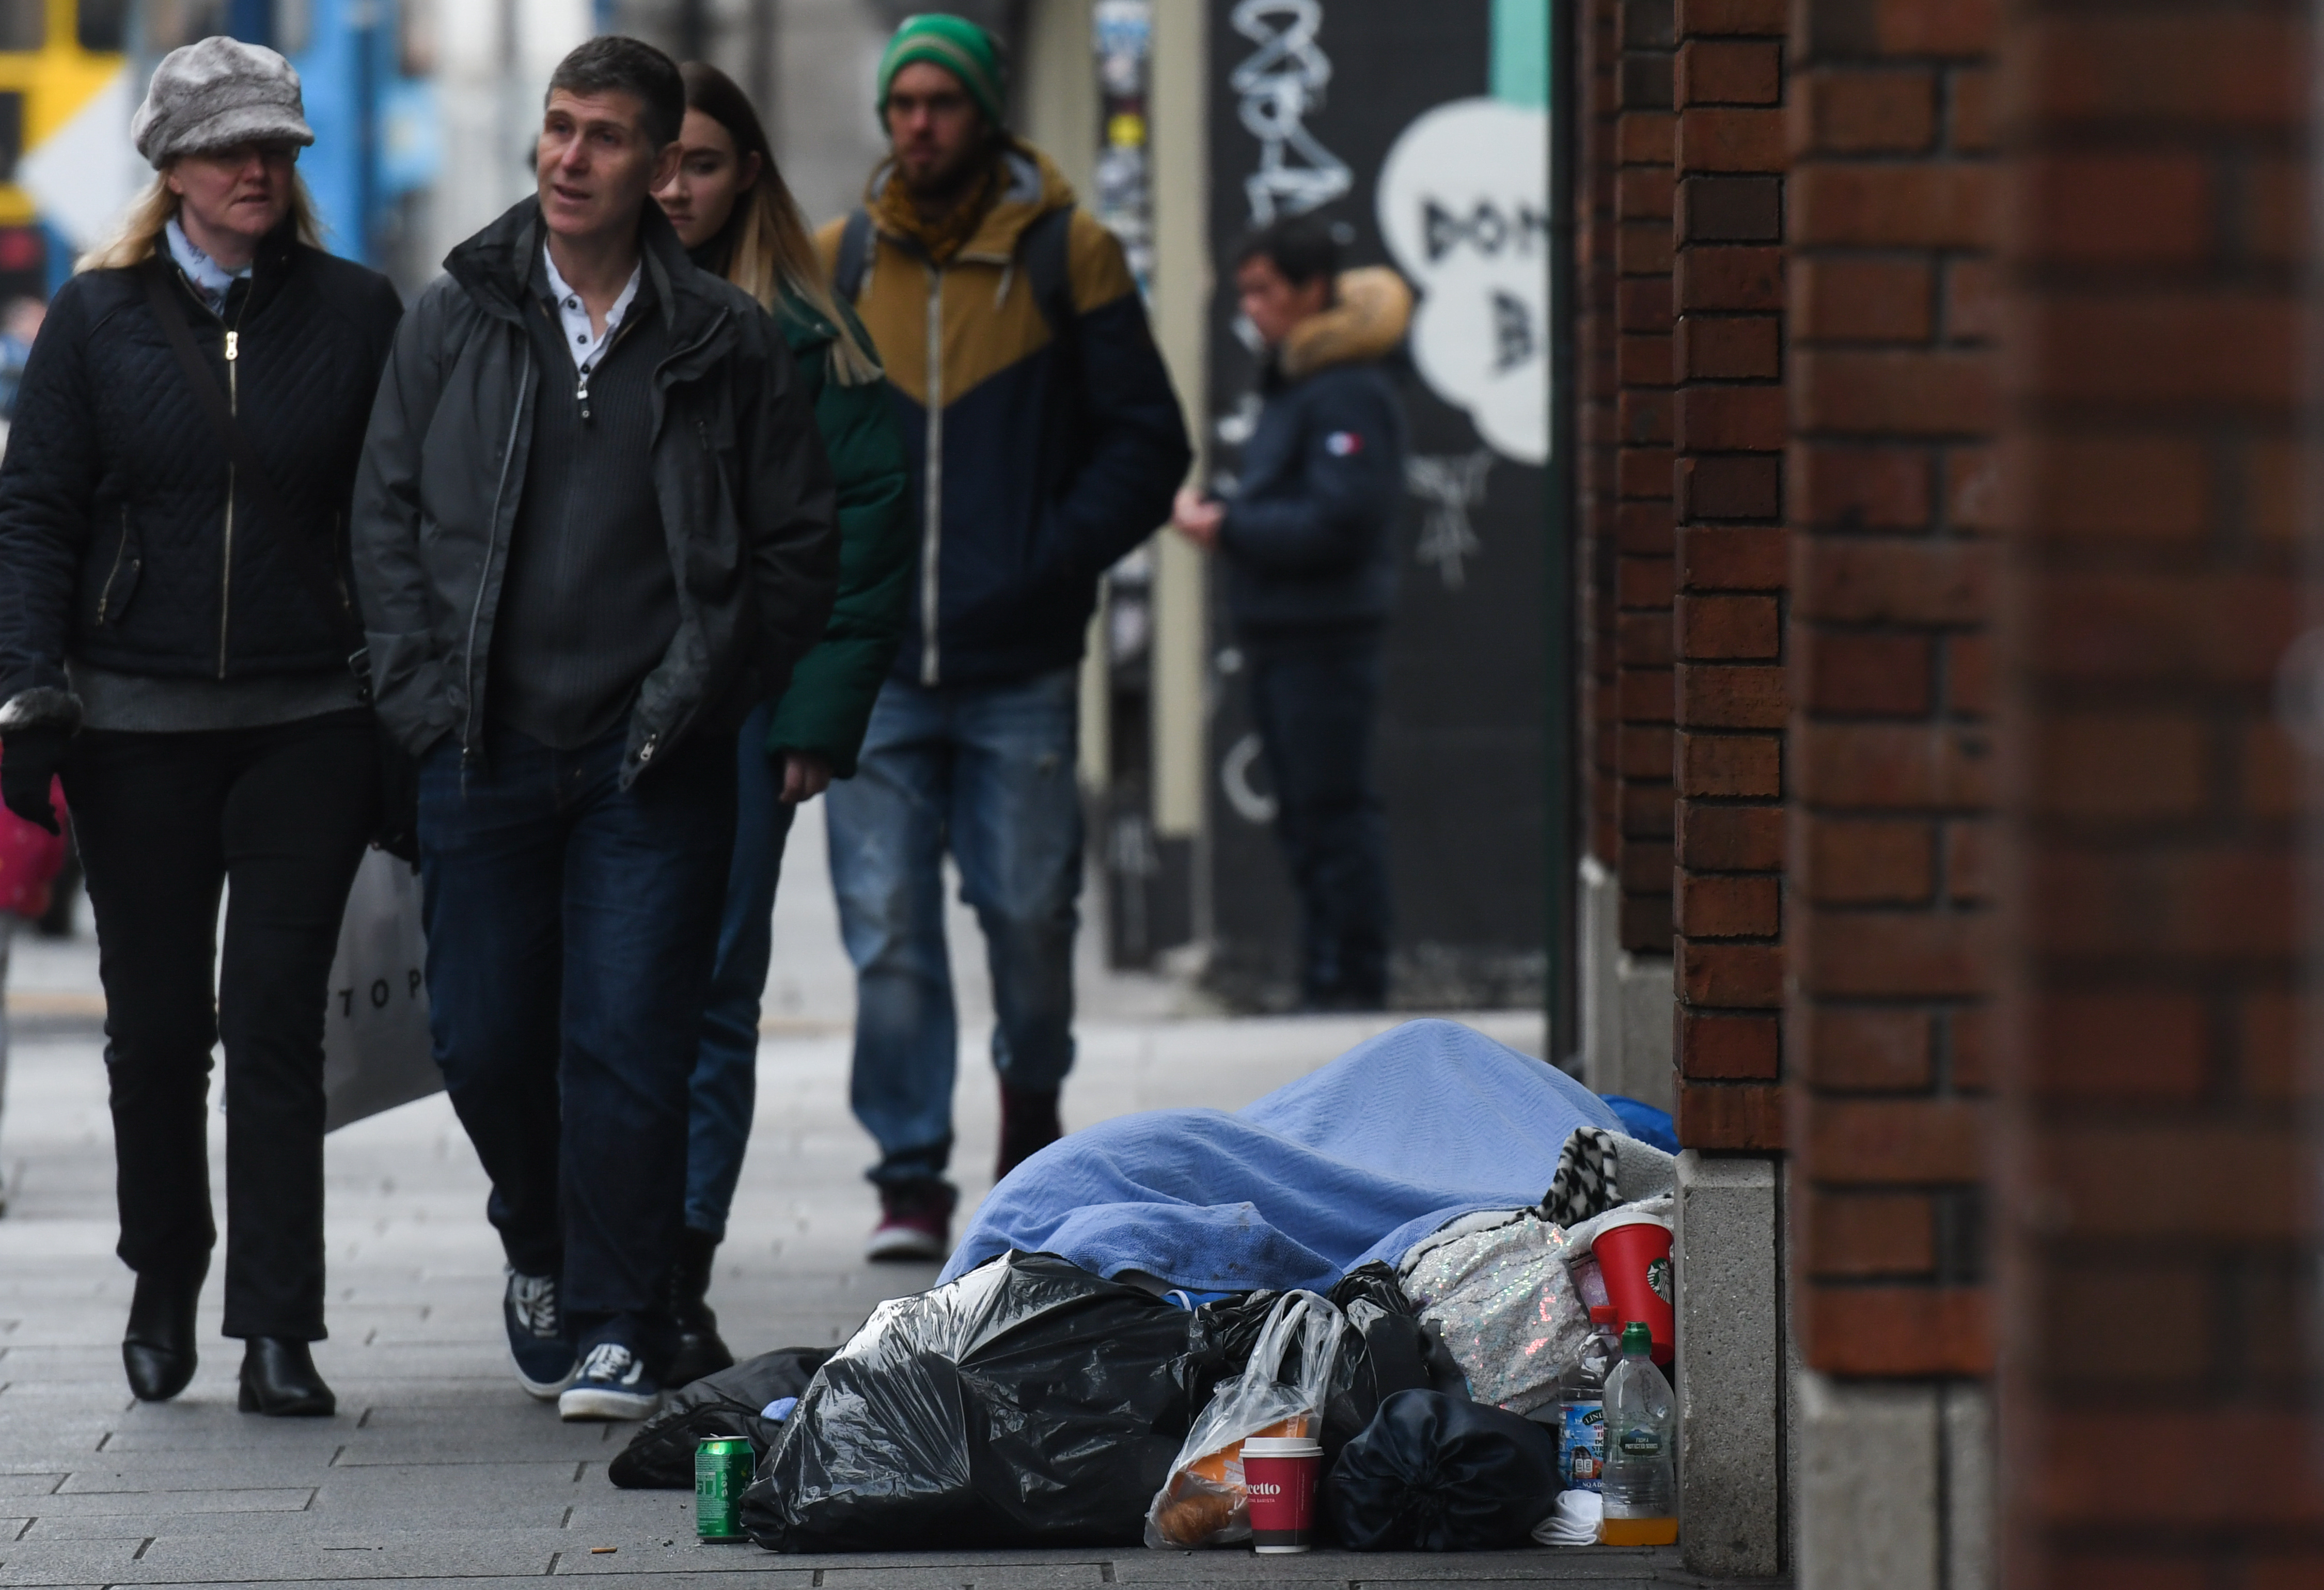 Thousands 'left behind' in poverty in Ireland